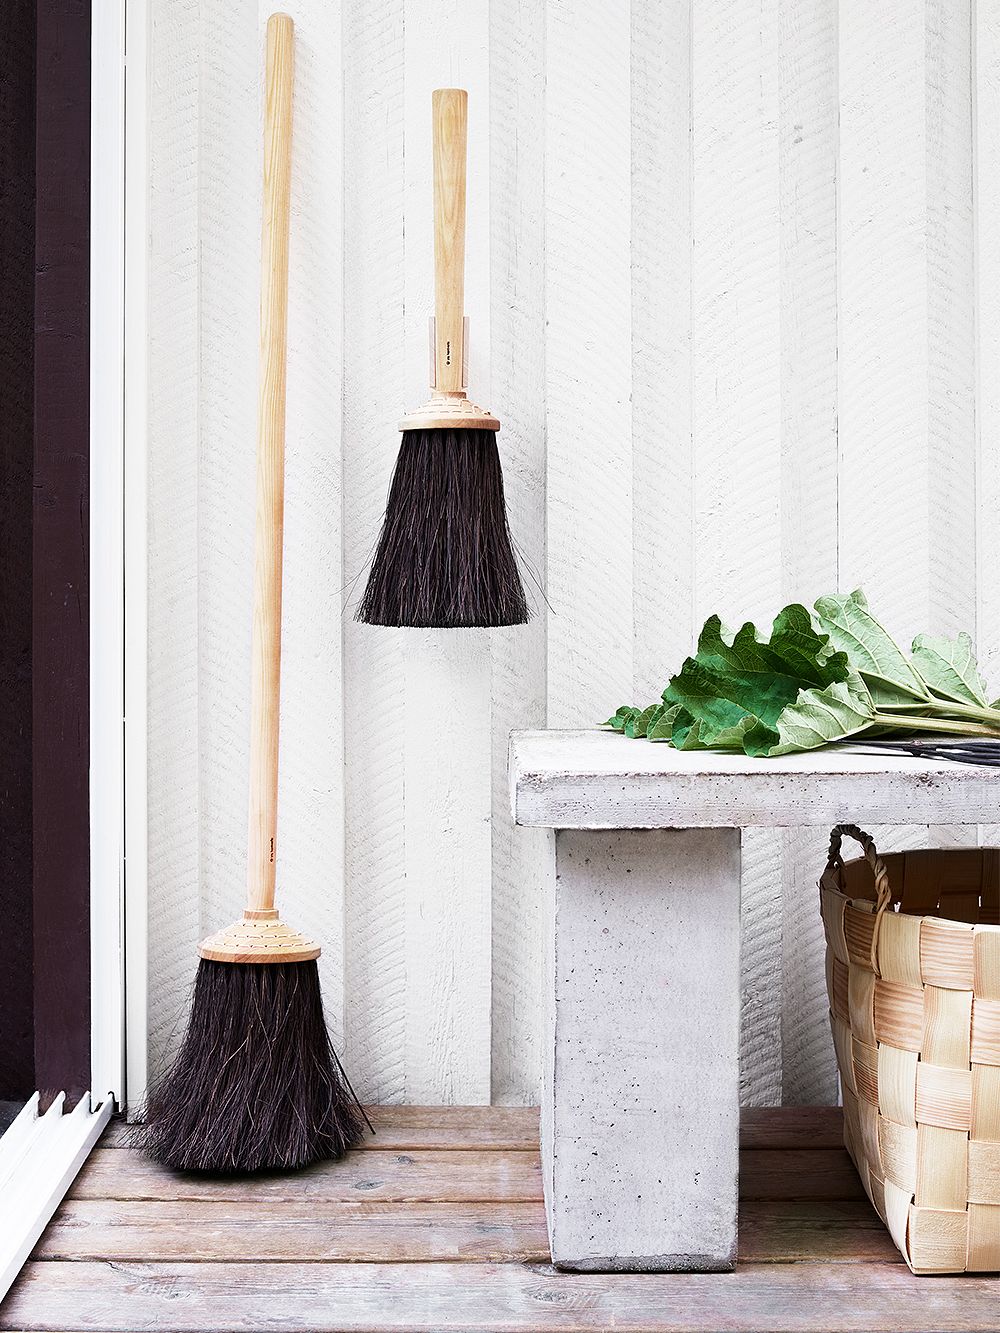 An image of Iris Hantverk's long porch broom and short porch broom leaning against the summer cottage wall, as part of the summer house decor.